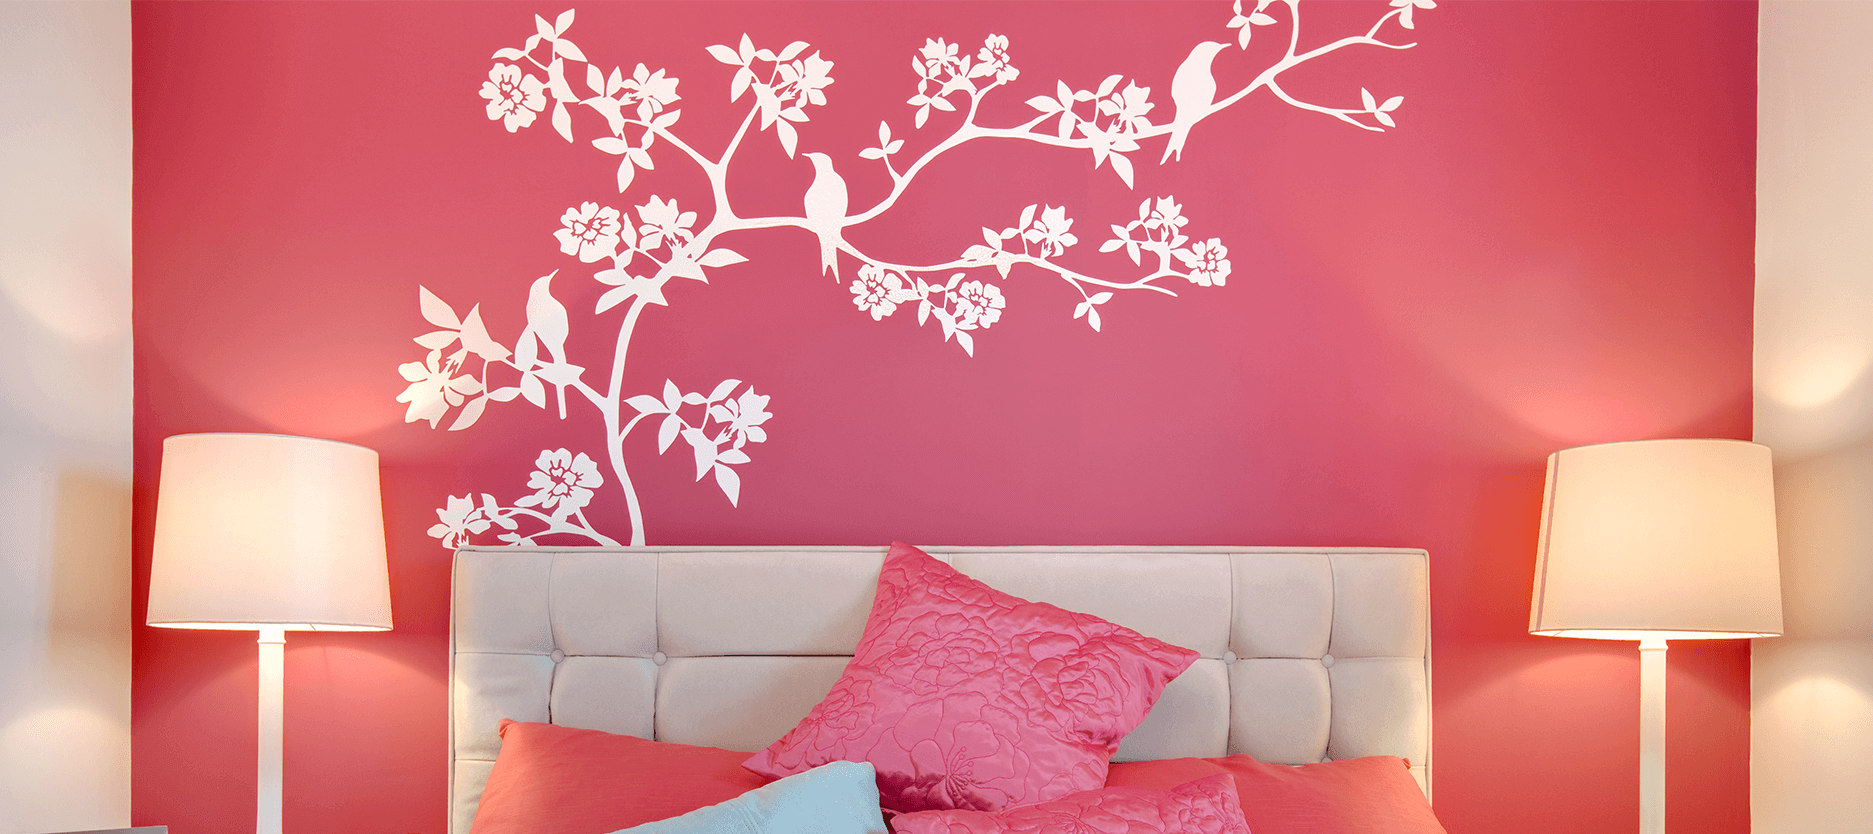 What’s more fun than painting a wall mural?